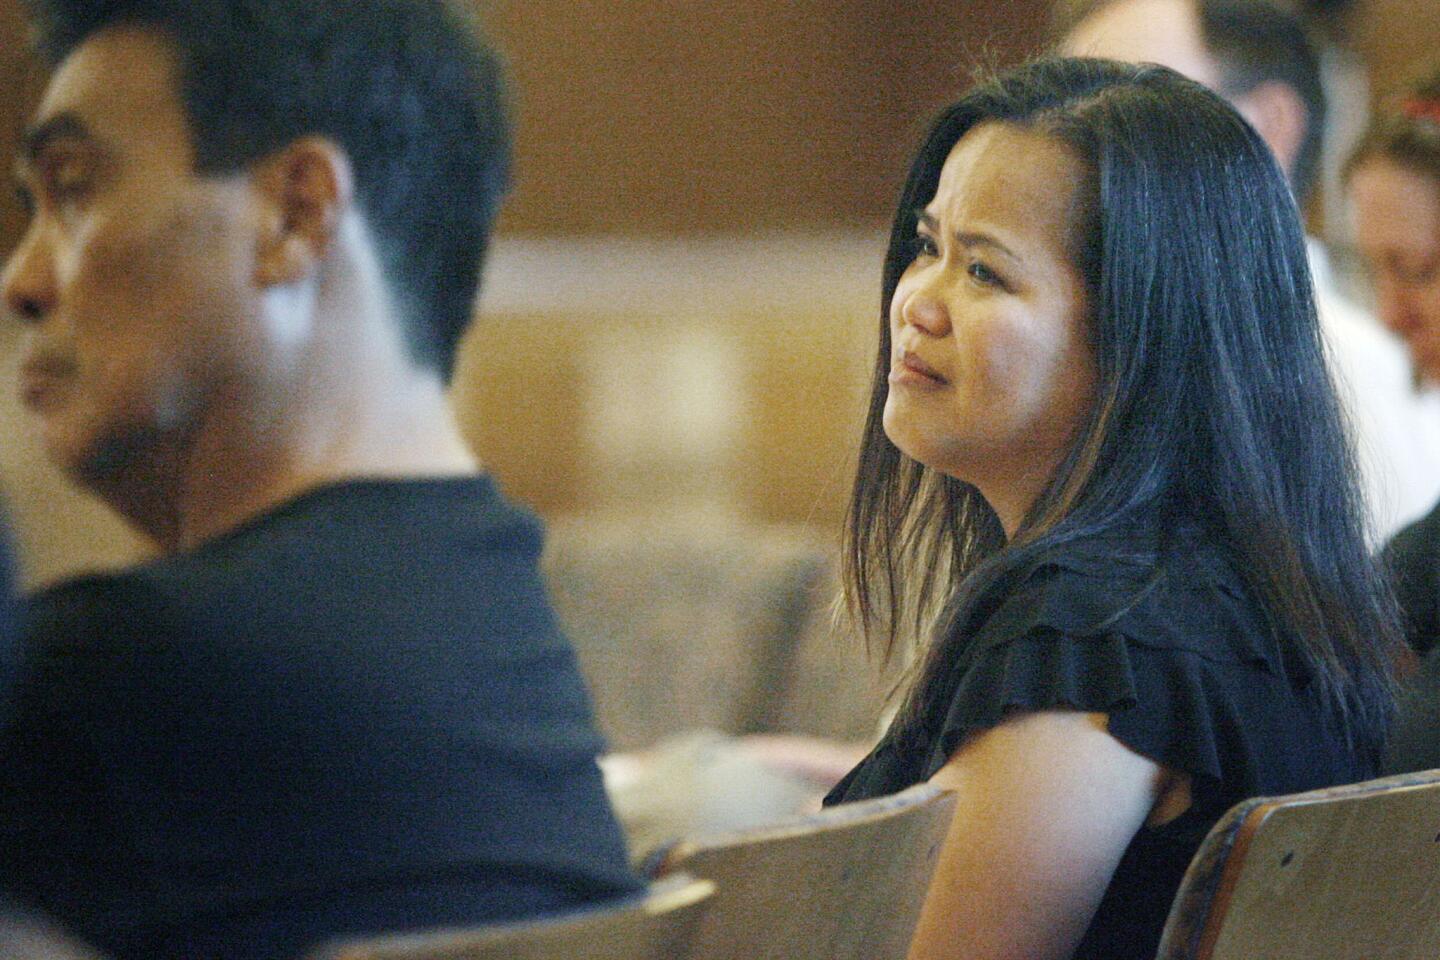 Thea Ivens, right, listens to Jaime Gonzalez read his eulogy during a vigil for Thea's husband, FBI agent Stephen Ivens, which took place at St. Franci Xavier Catholic Church in Burbank on Thursday, August 9, 2012.